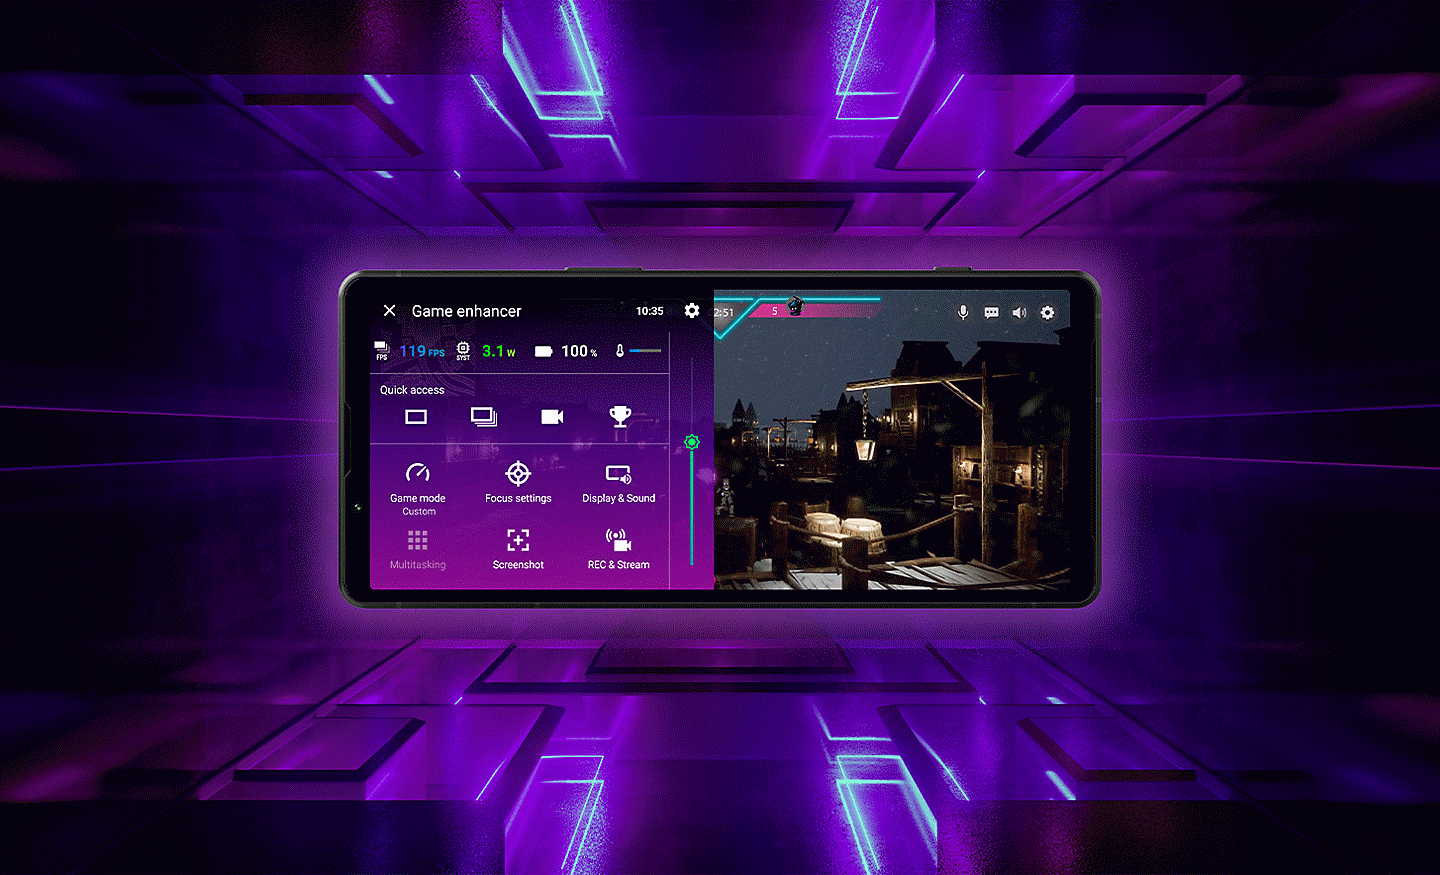 Image of an Xperia 5 V with a game enhancer interface on screen on a purple 3-D effect background